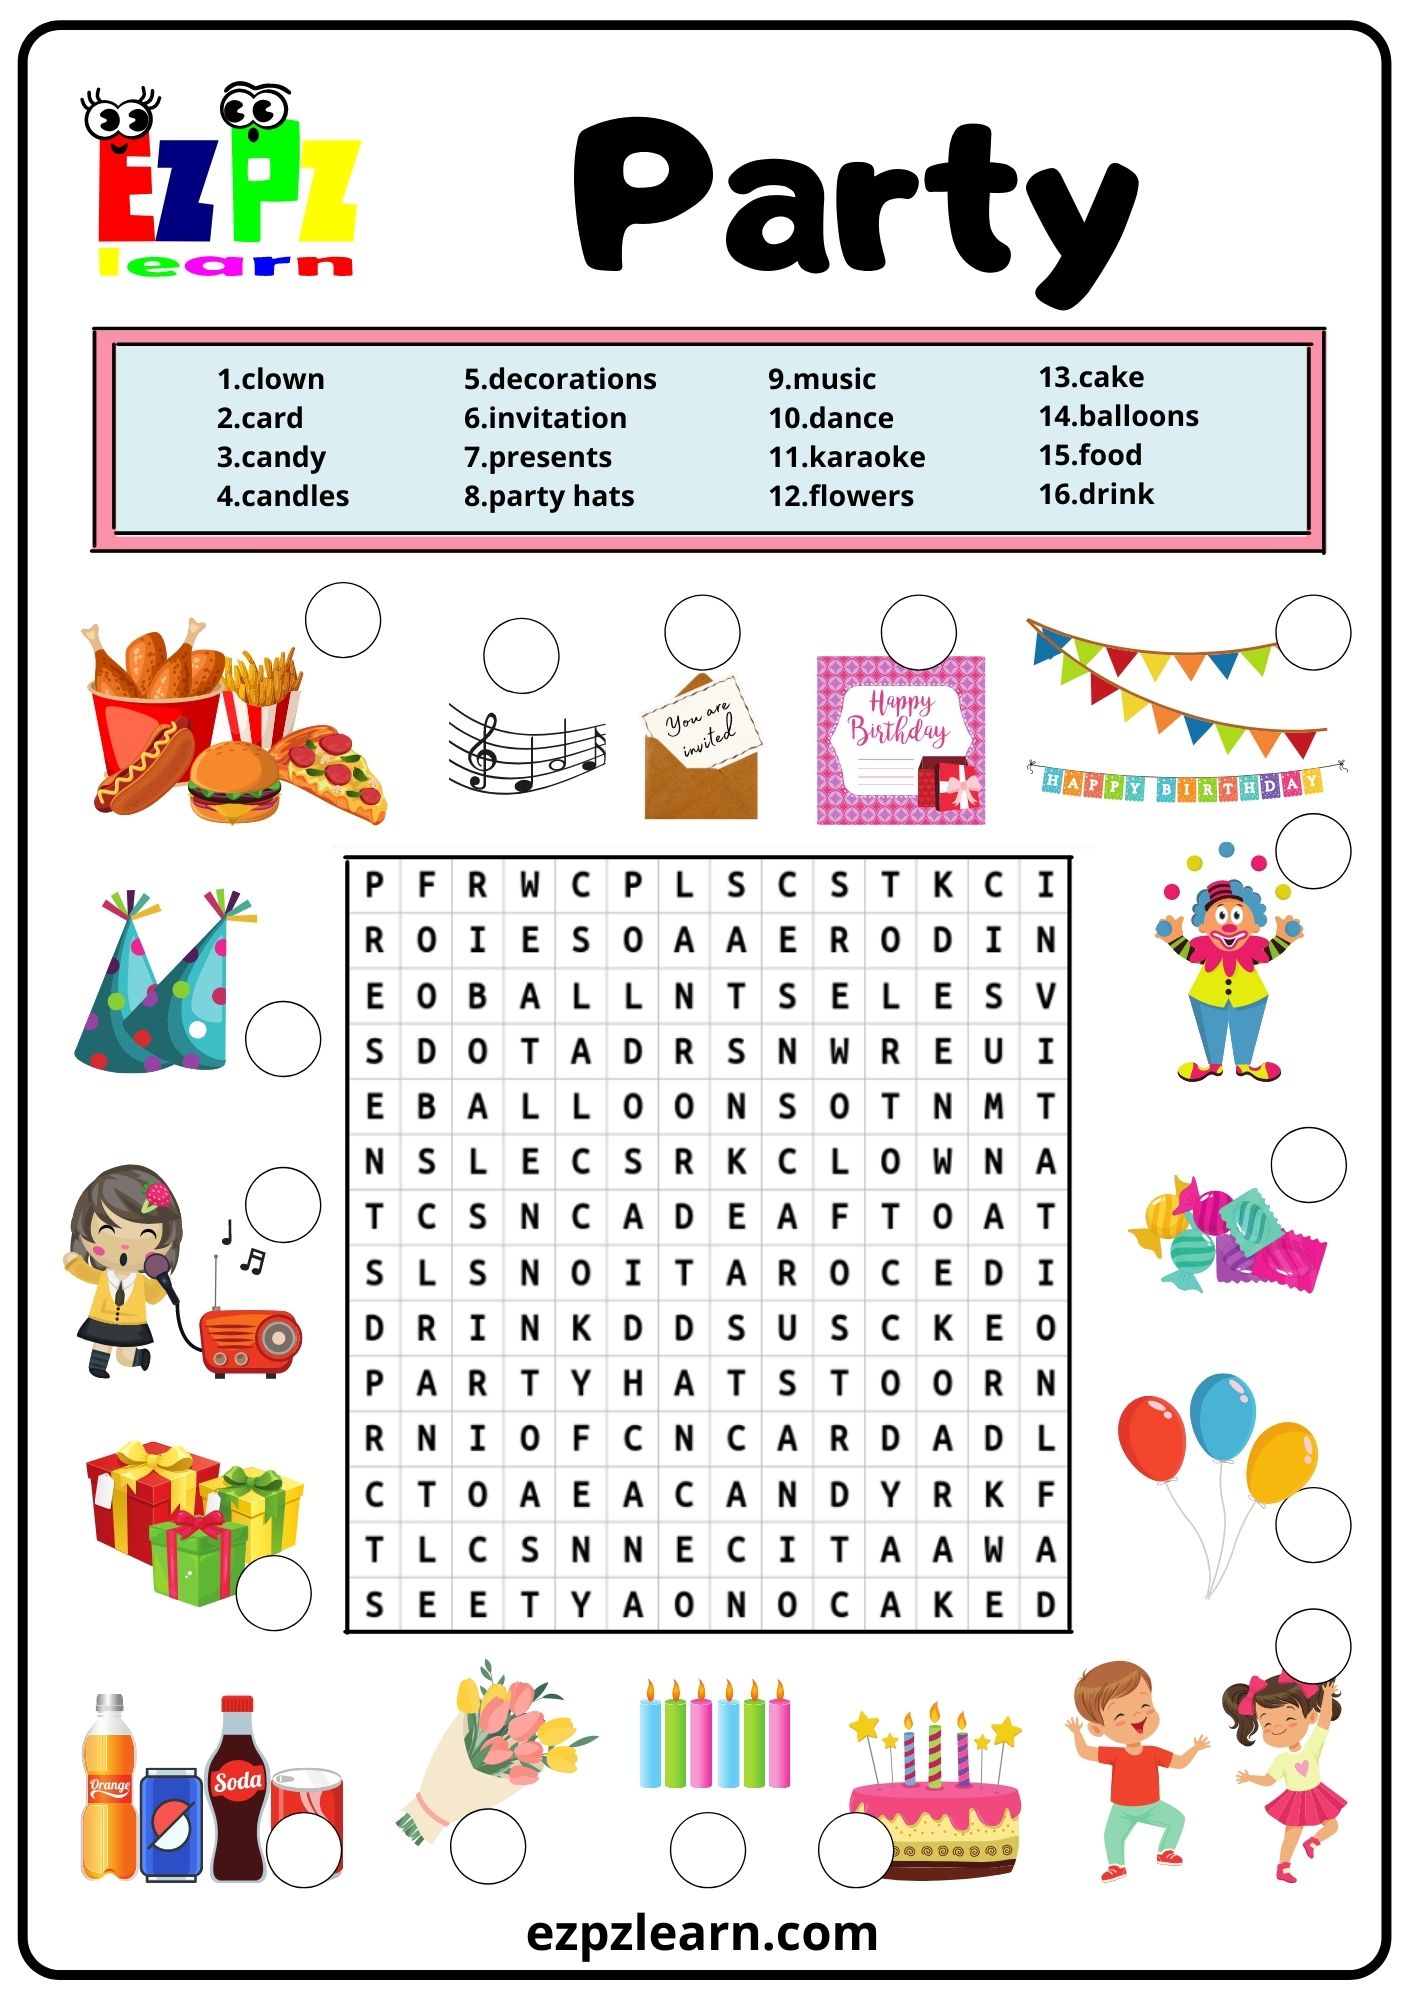 Word Search Cake decorations - YouTube